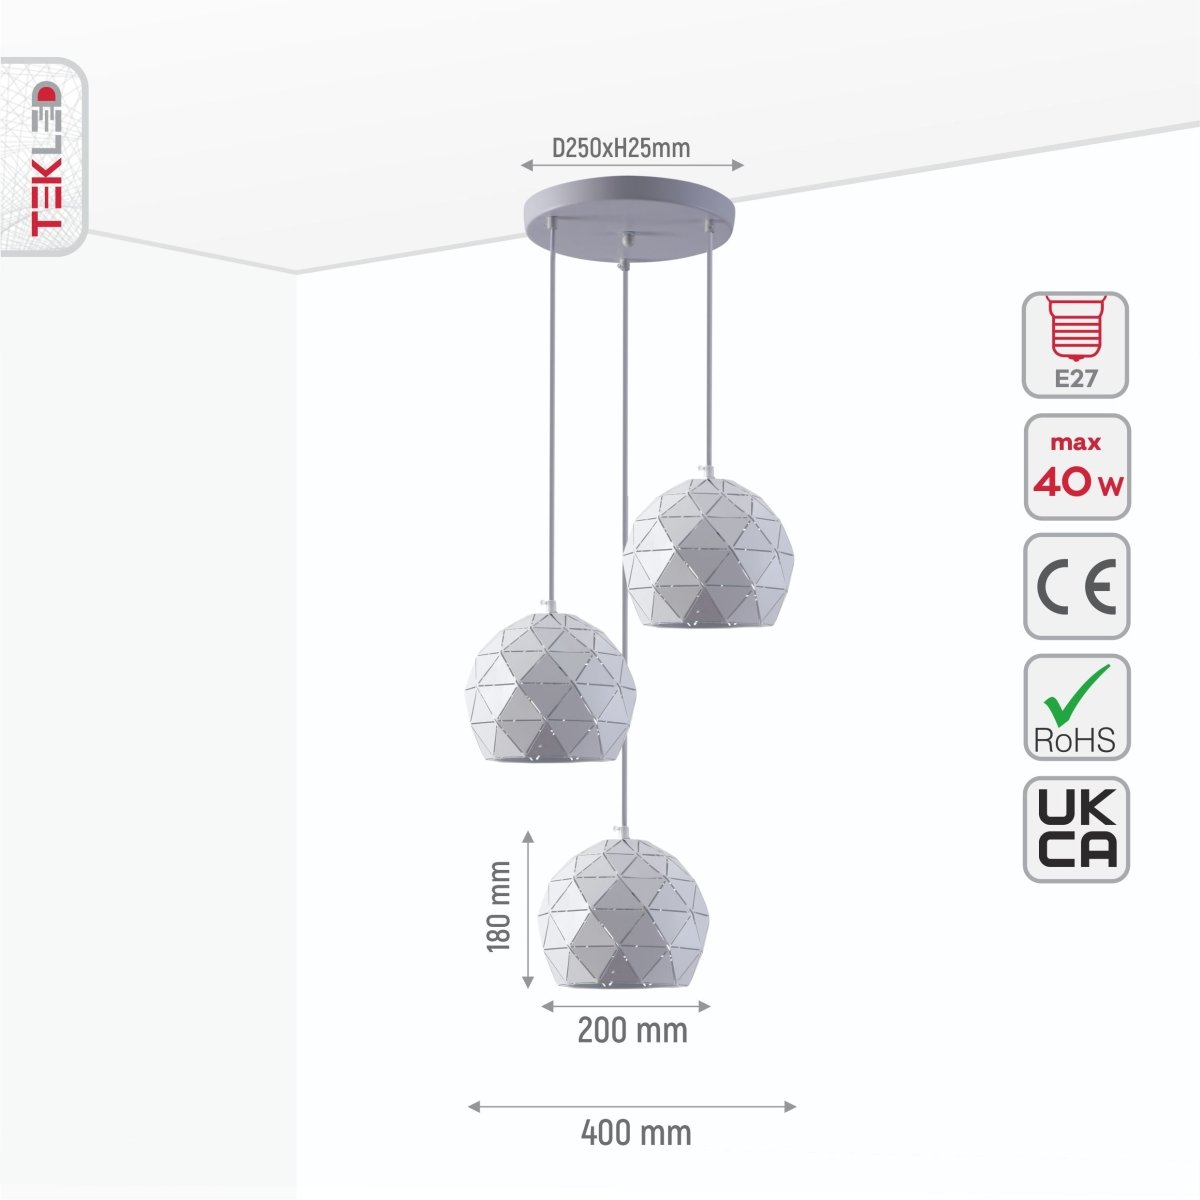 Size and specs of White Metal Laser Cut Globe Pendant Light with 3xE27 Fitting | TEKLED 150-18258